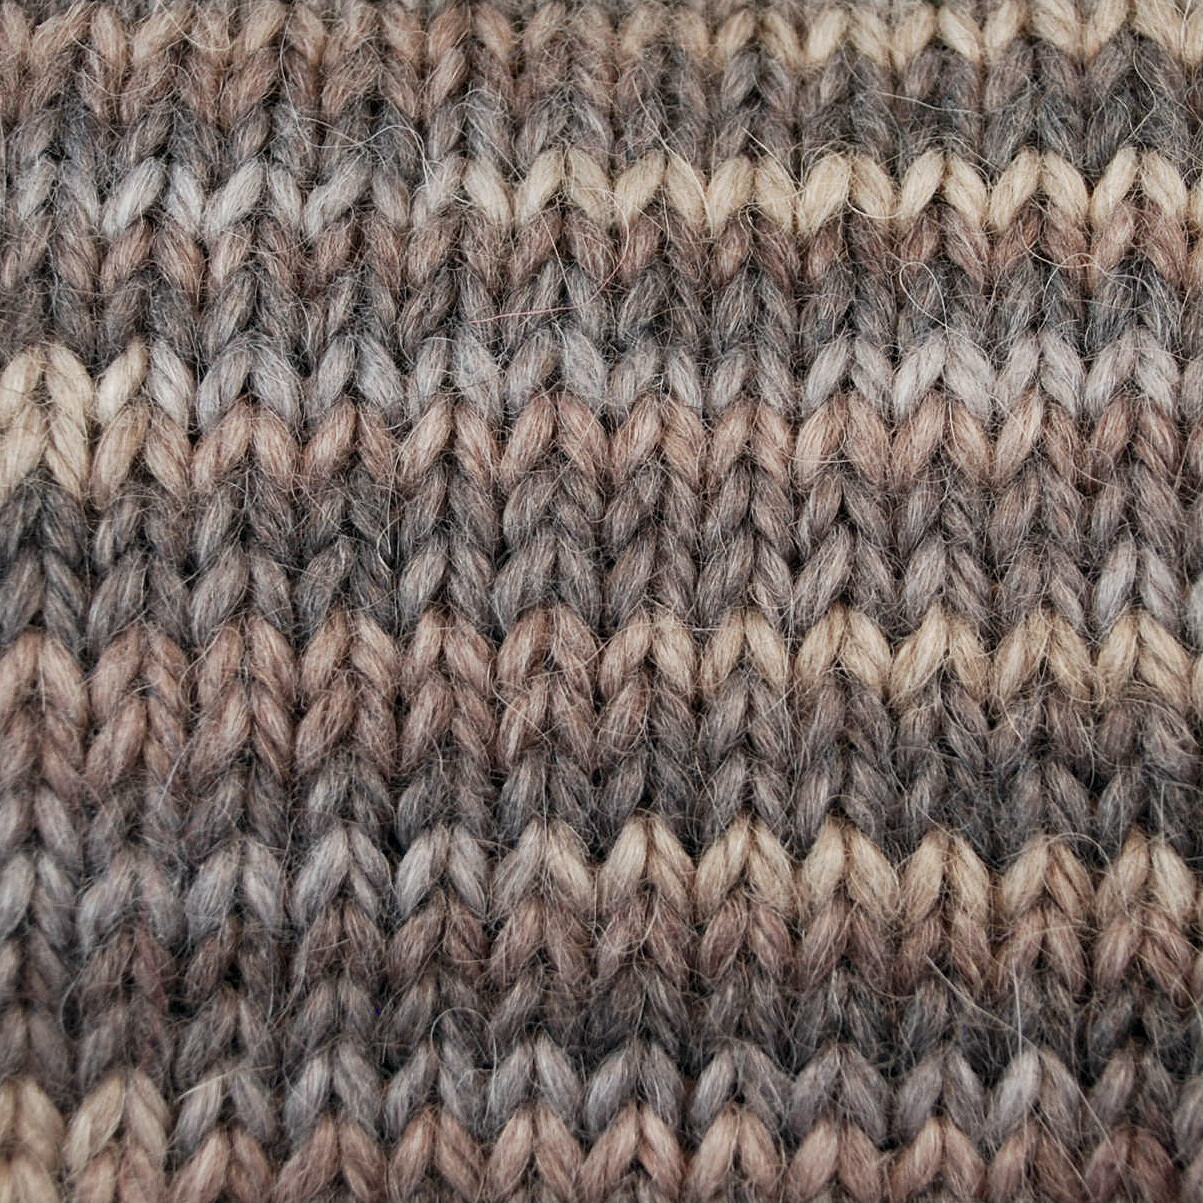 Snuggle Yarn - A Knot of Naturals